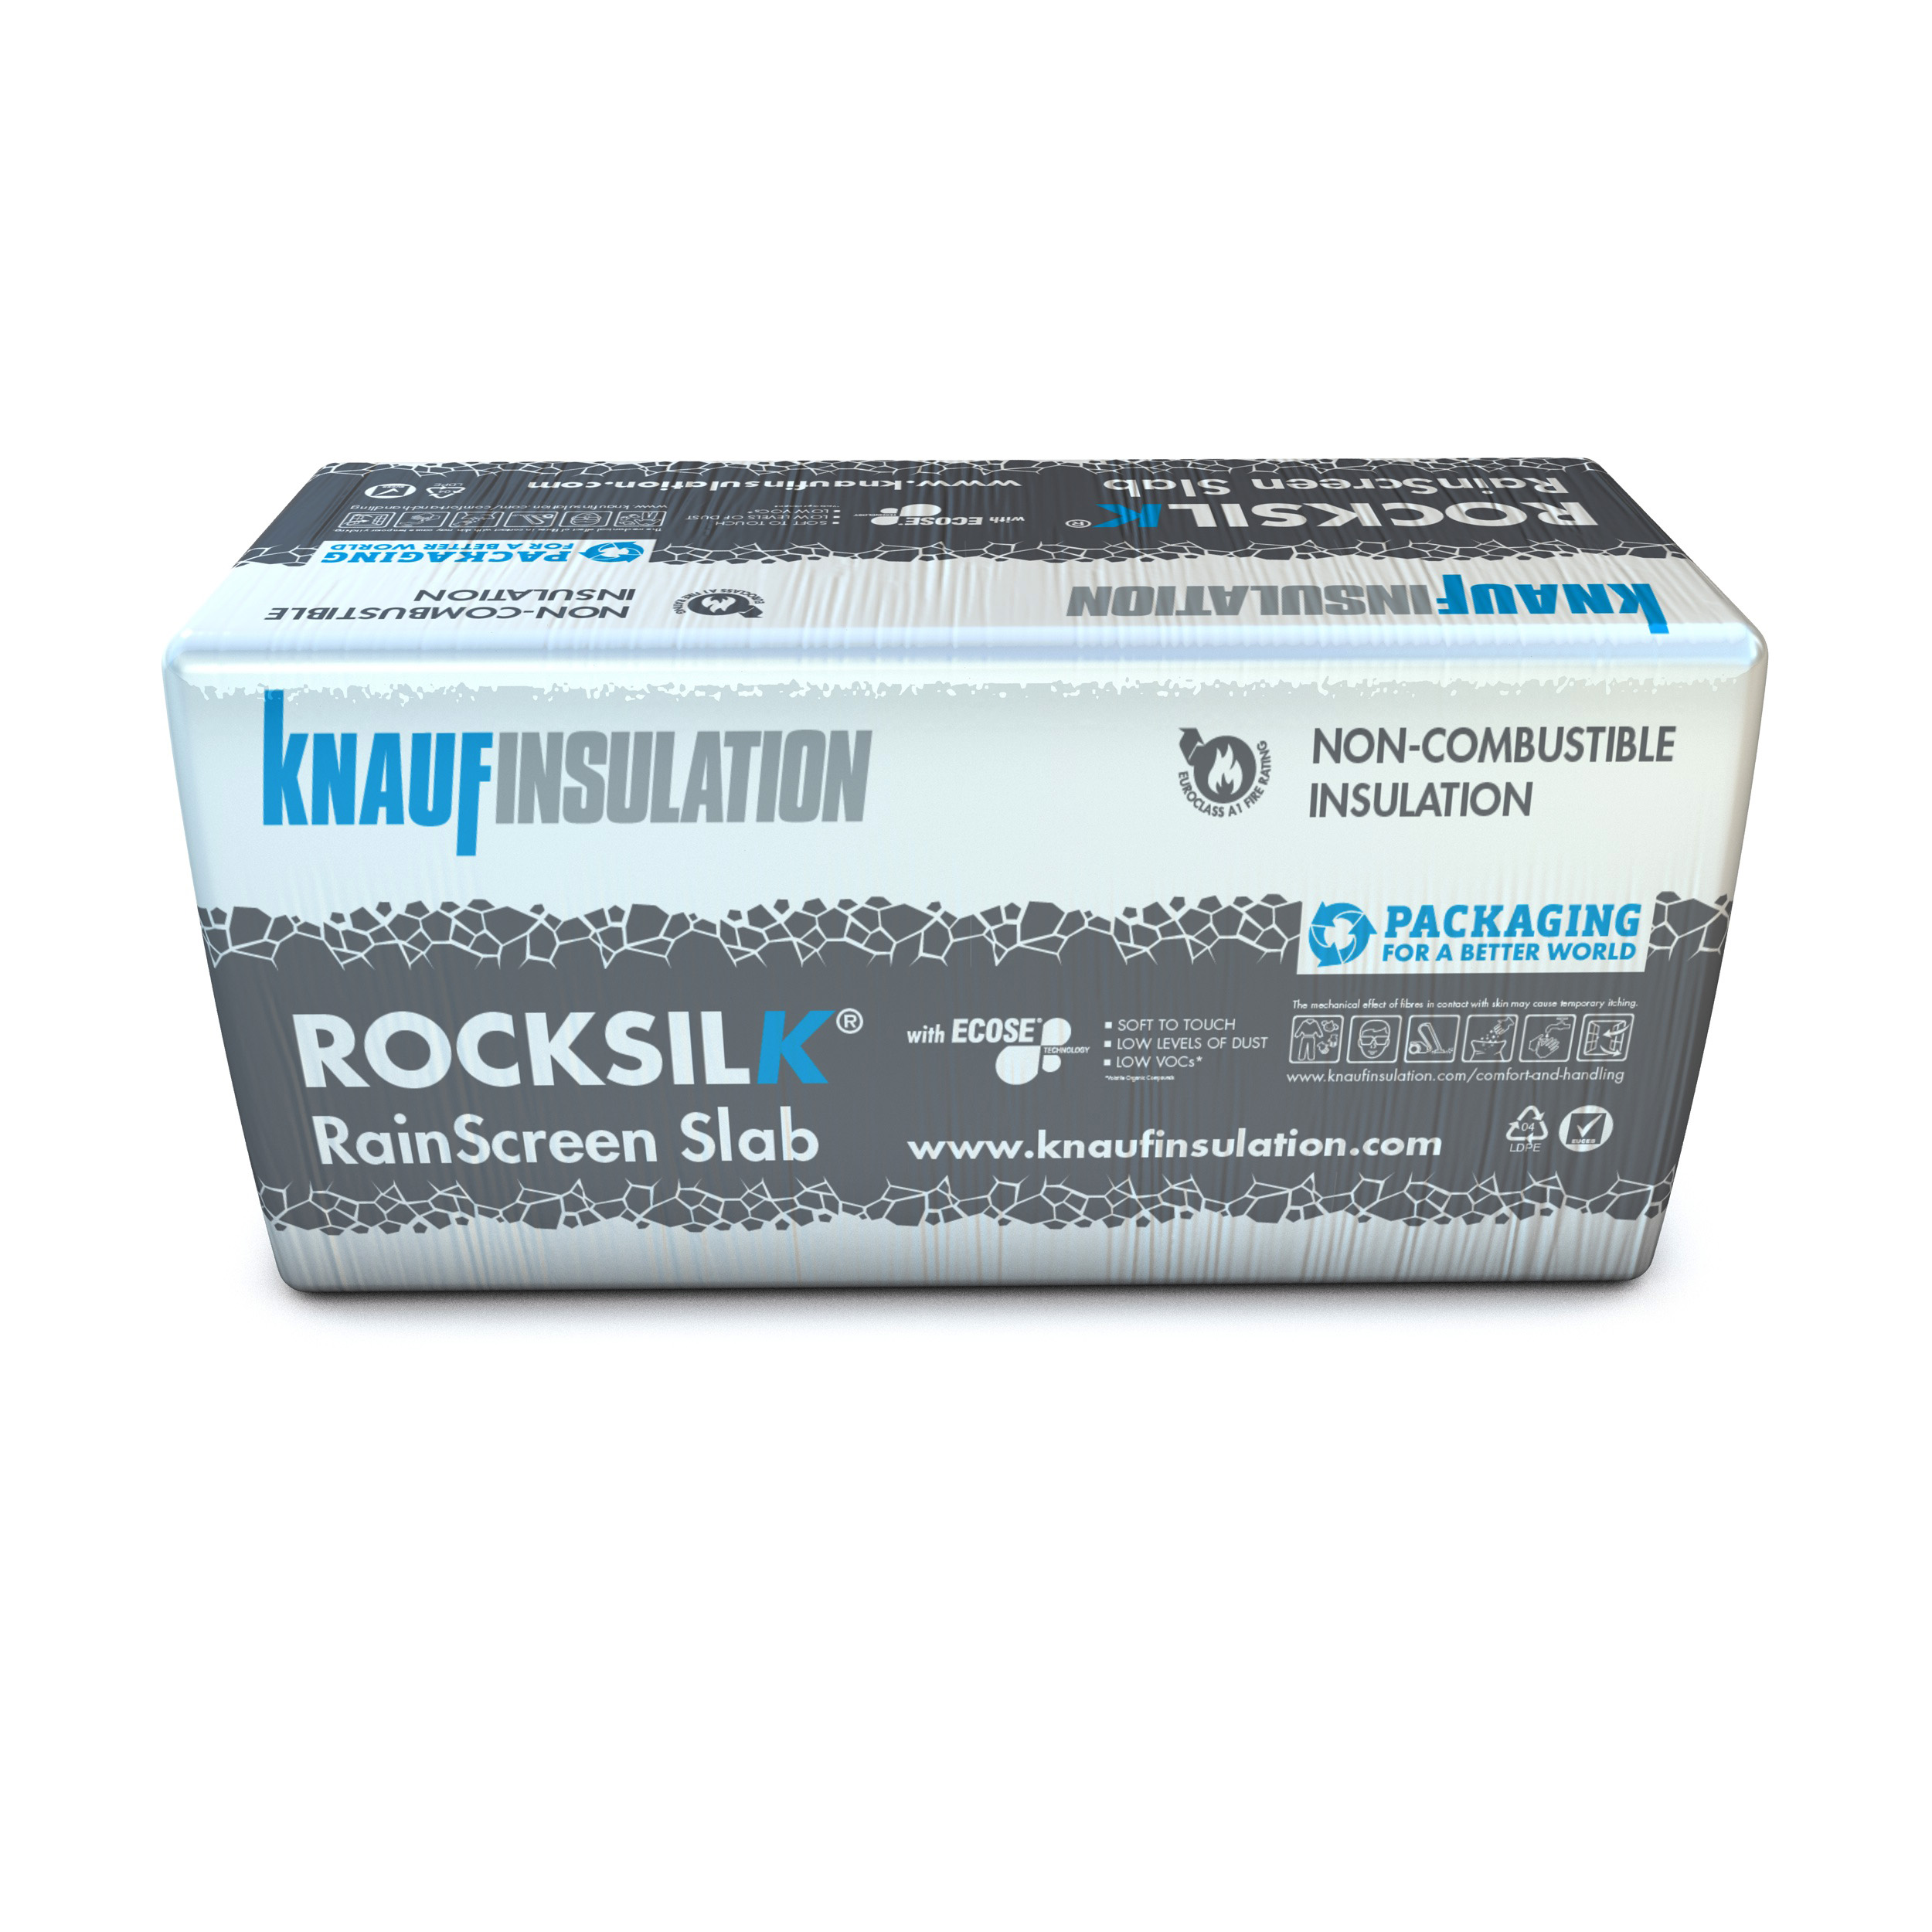 Knauf Insulation’s Support Makes The Grade